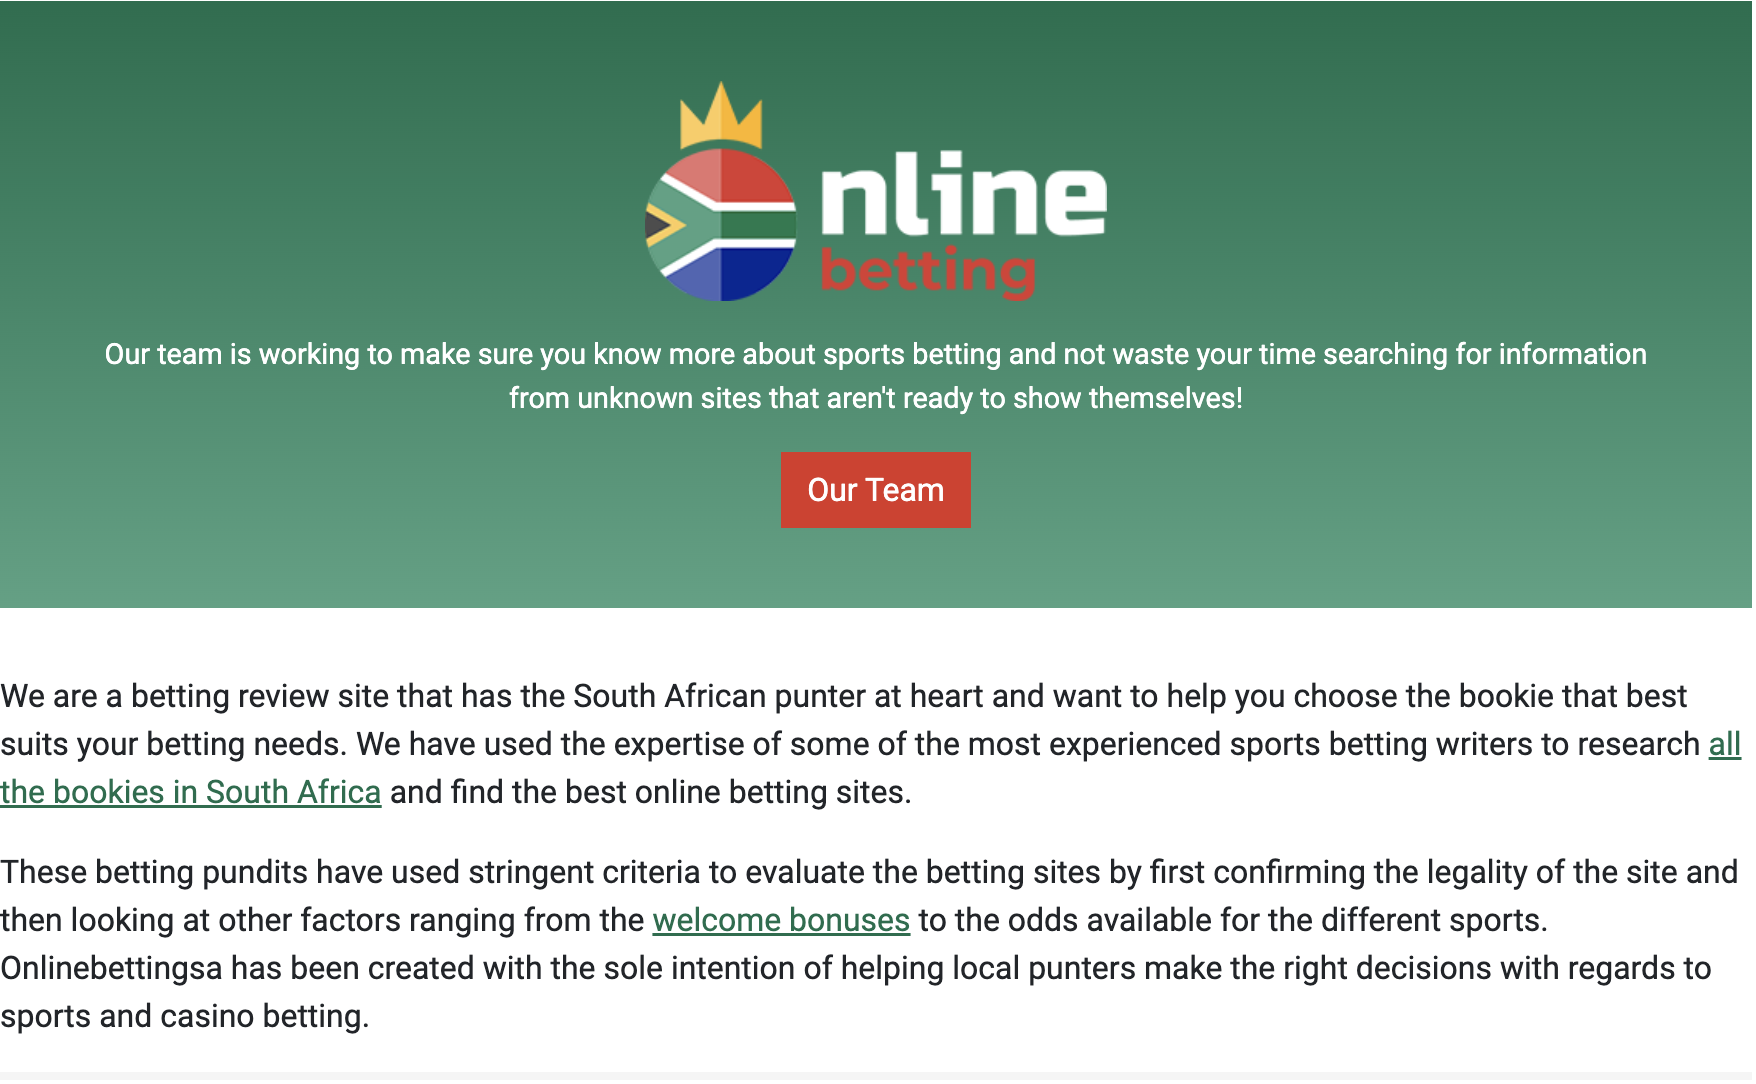 Sites With Reviews Of The Betting Market: OnlineBettingSA